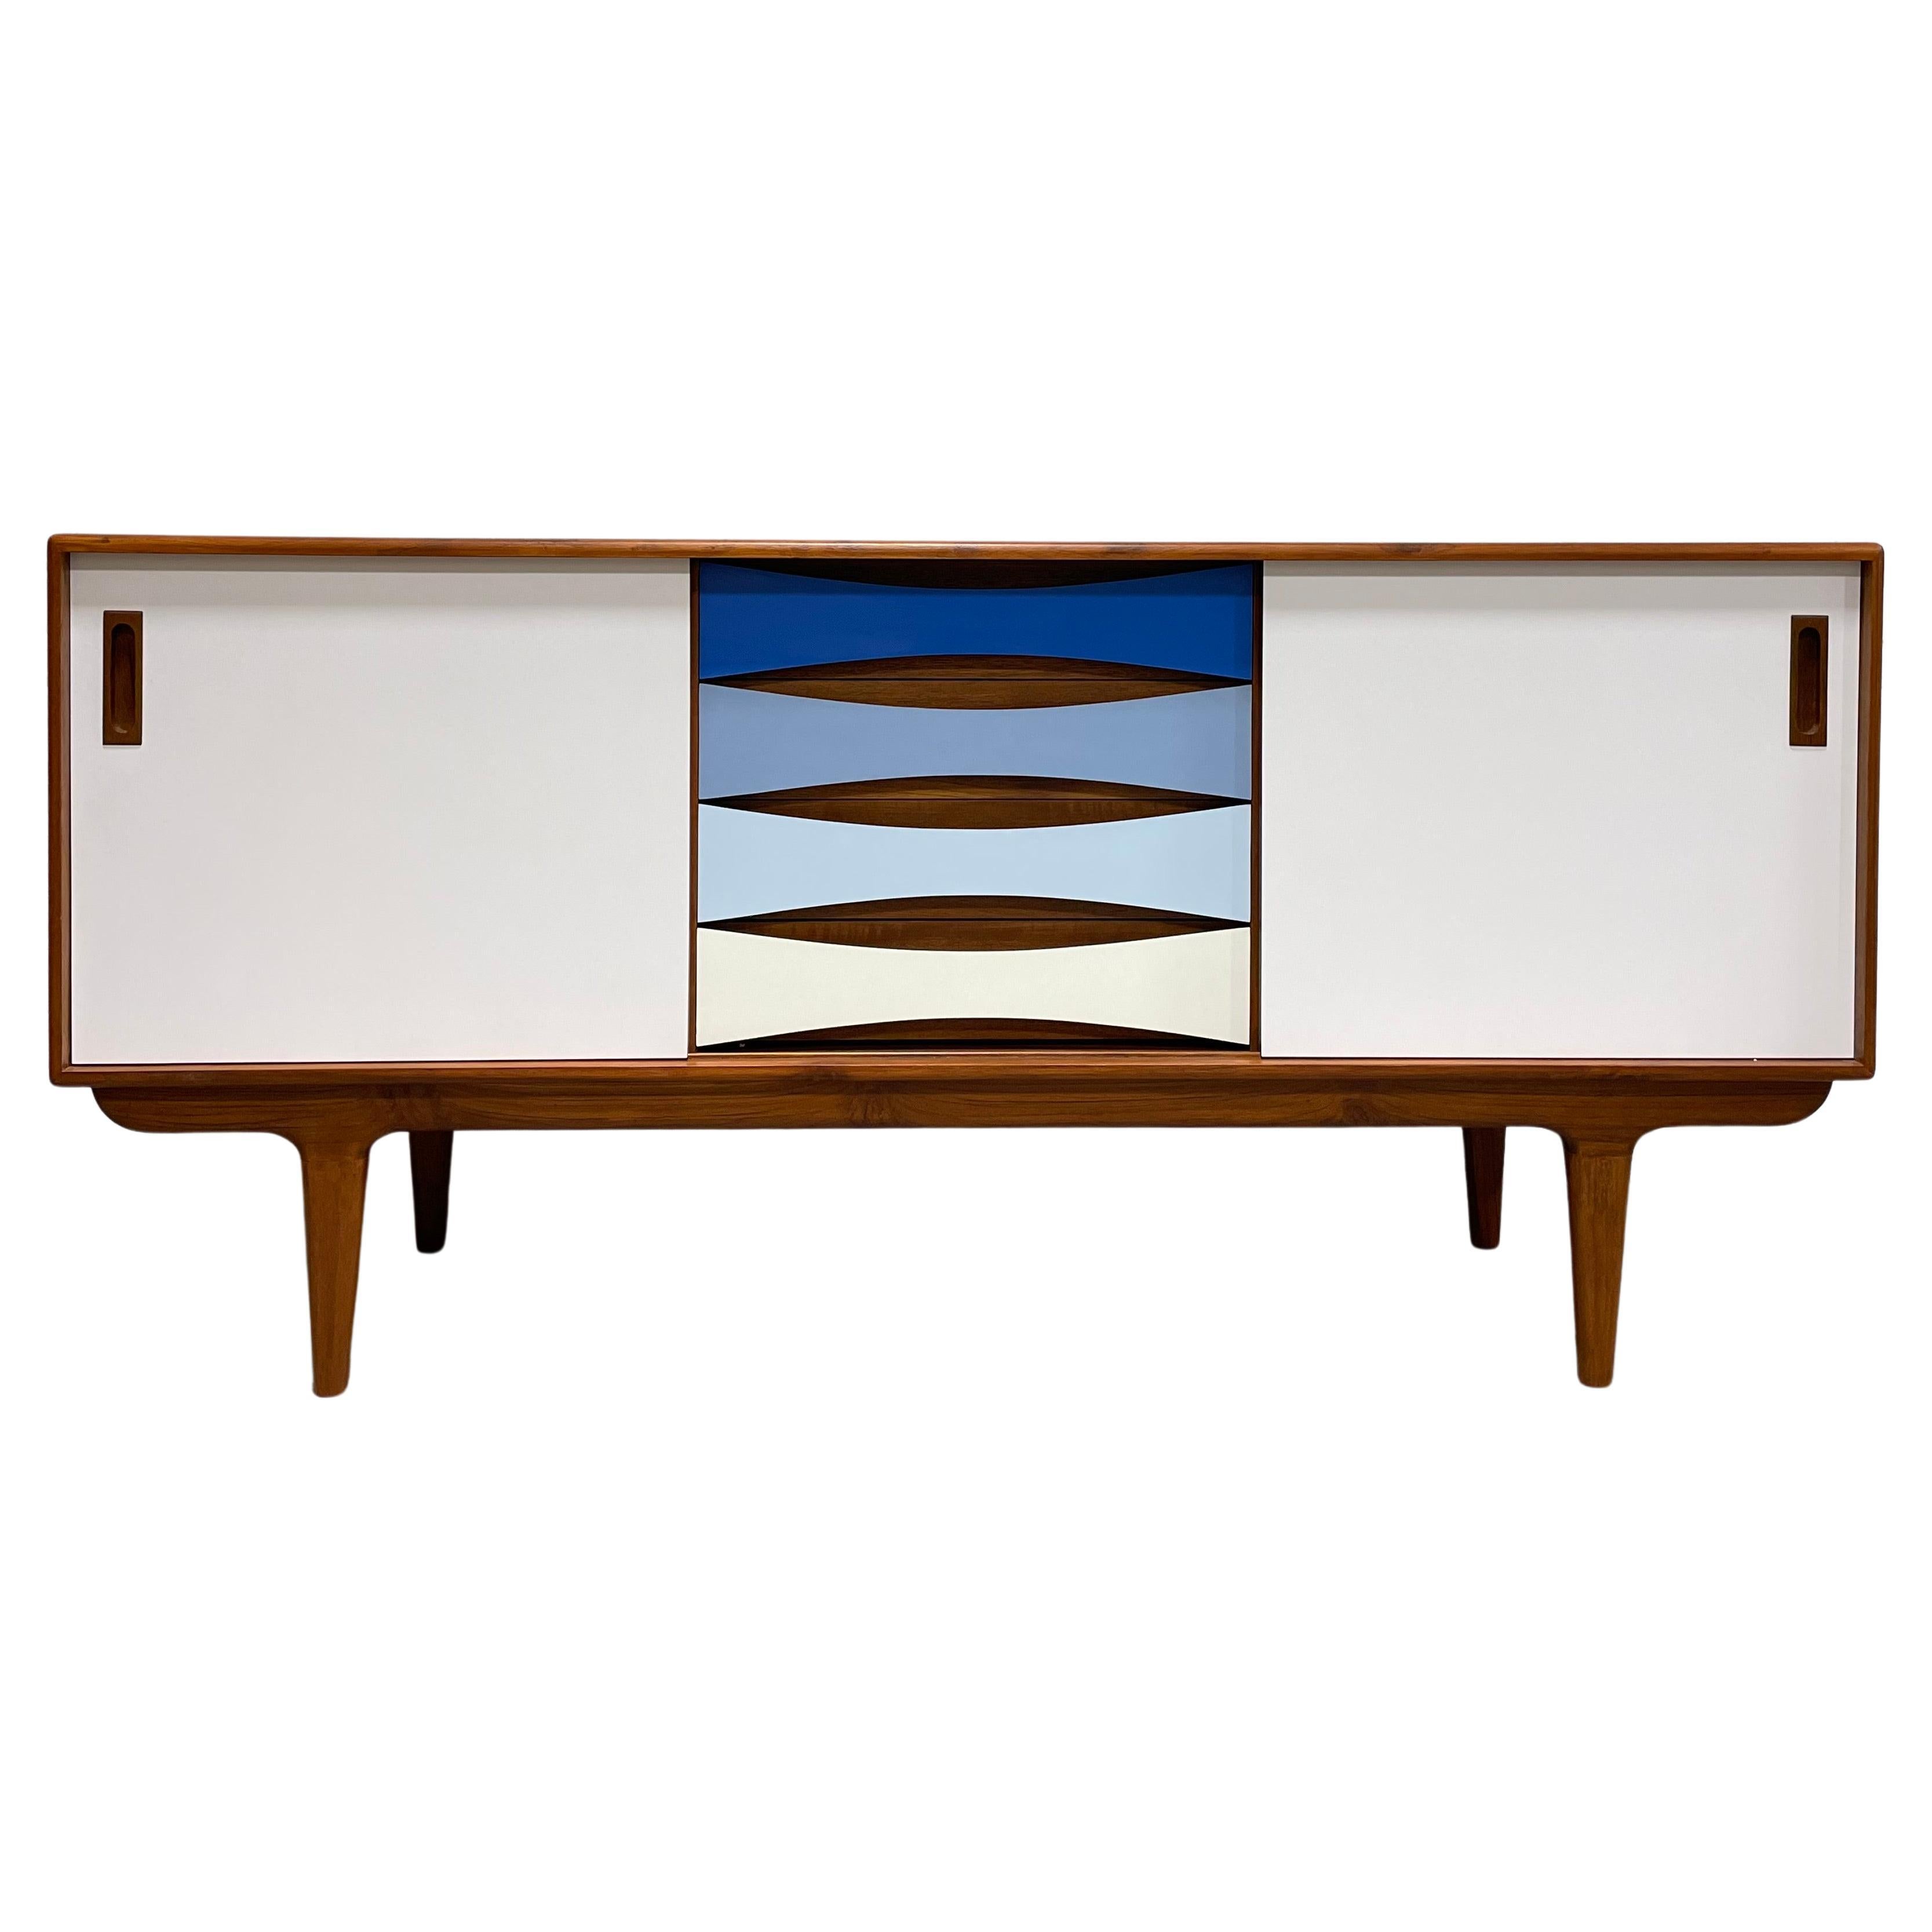 Mid-Century Modern Shades of Blue Credenza / Sideboard / Media Stand